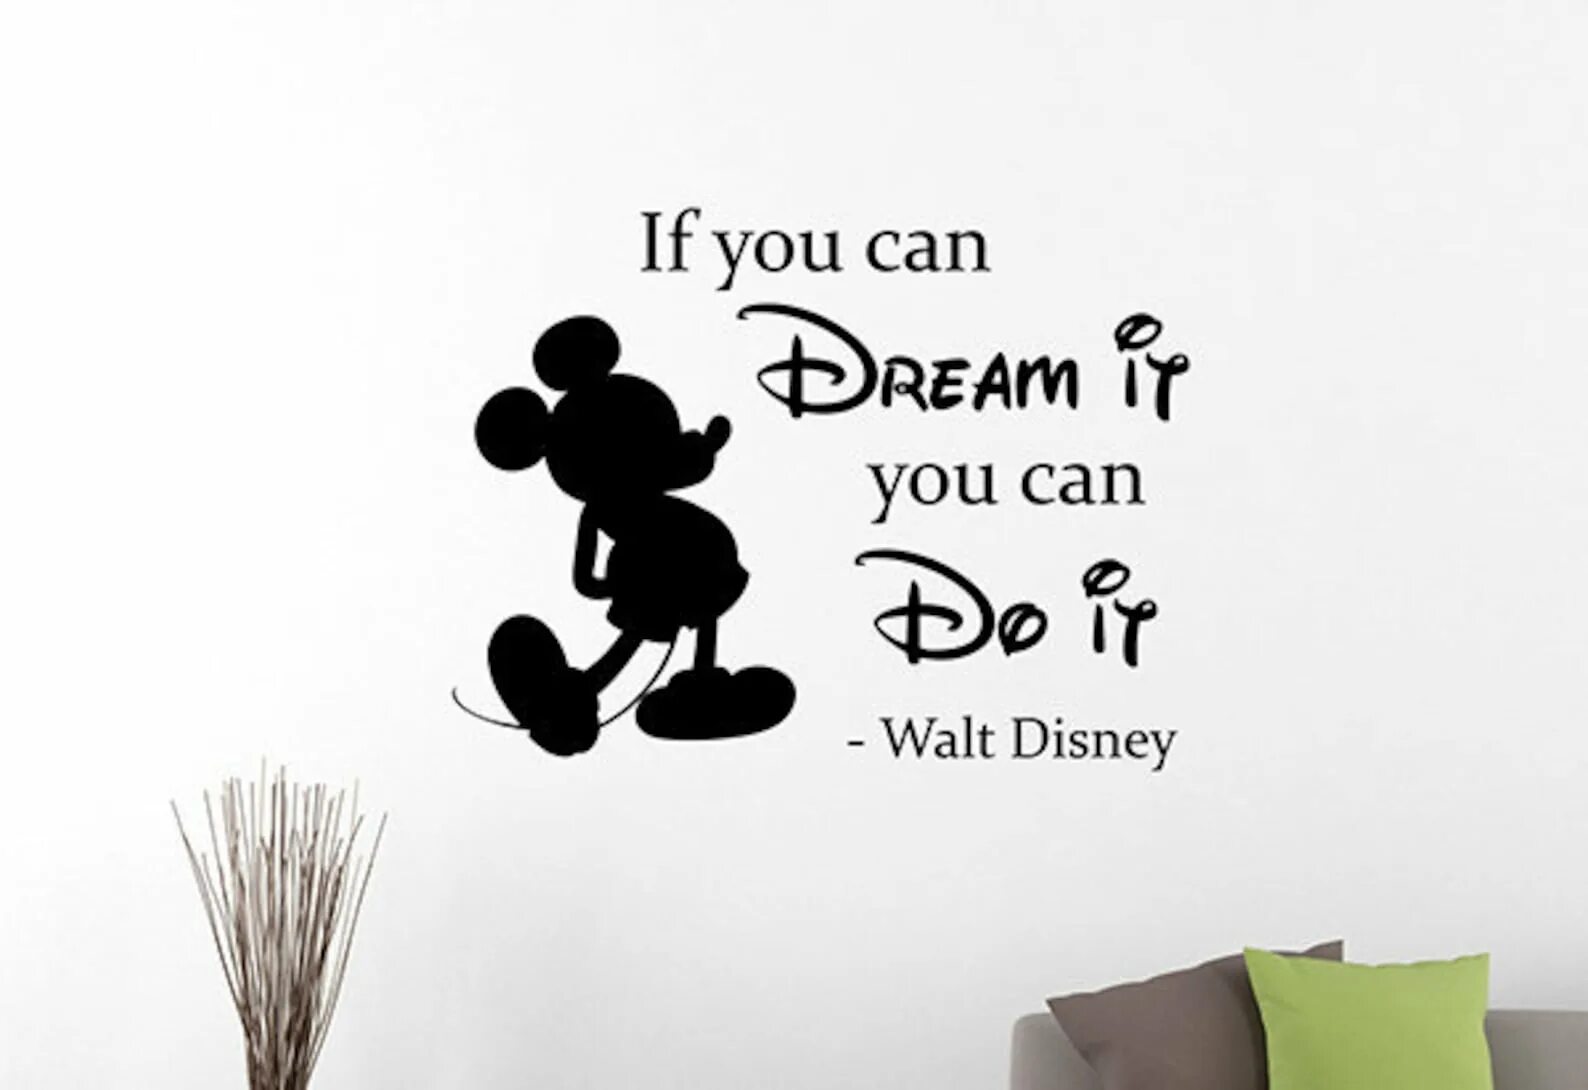 If i can dream. If you can Dream it you can do it Walt Disney. Уолт Дисней цитаты. У. Дисней цитаты на английском. You can do it красивым шрифтом.